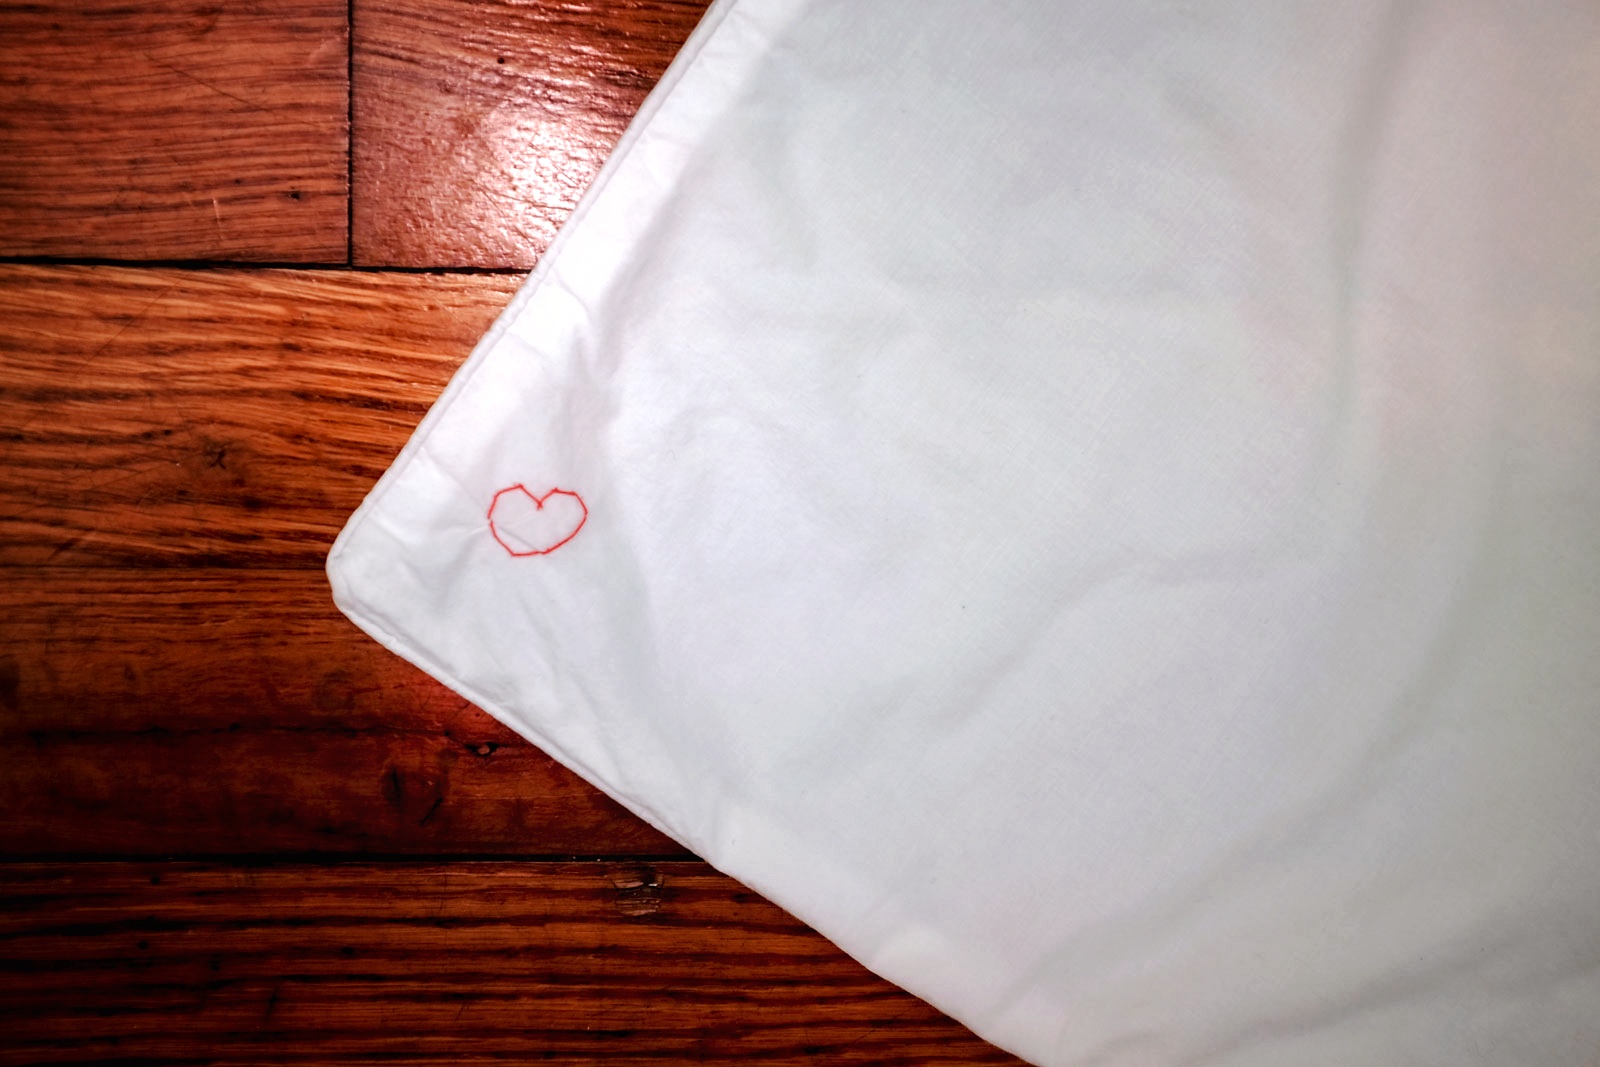 A pillowcase with a heart embroidered on it